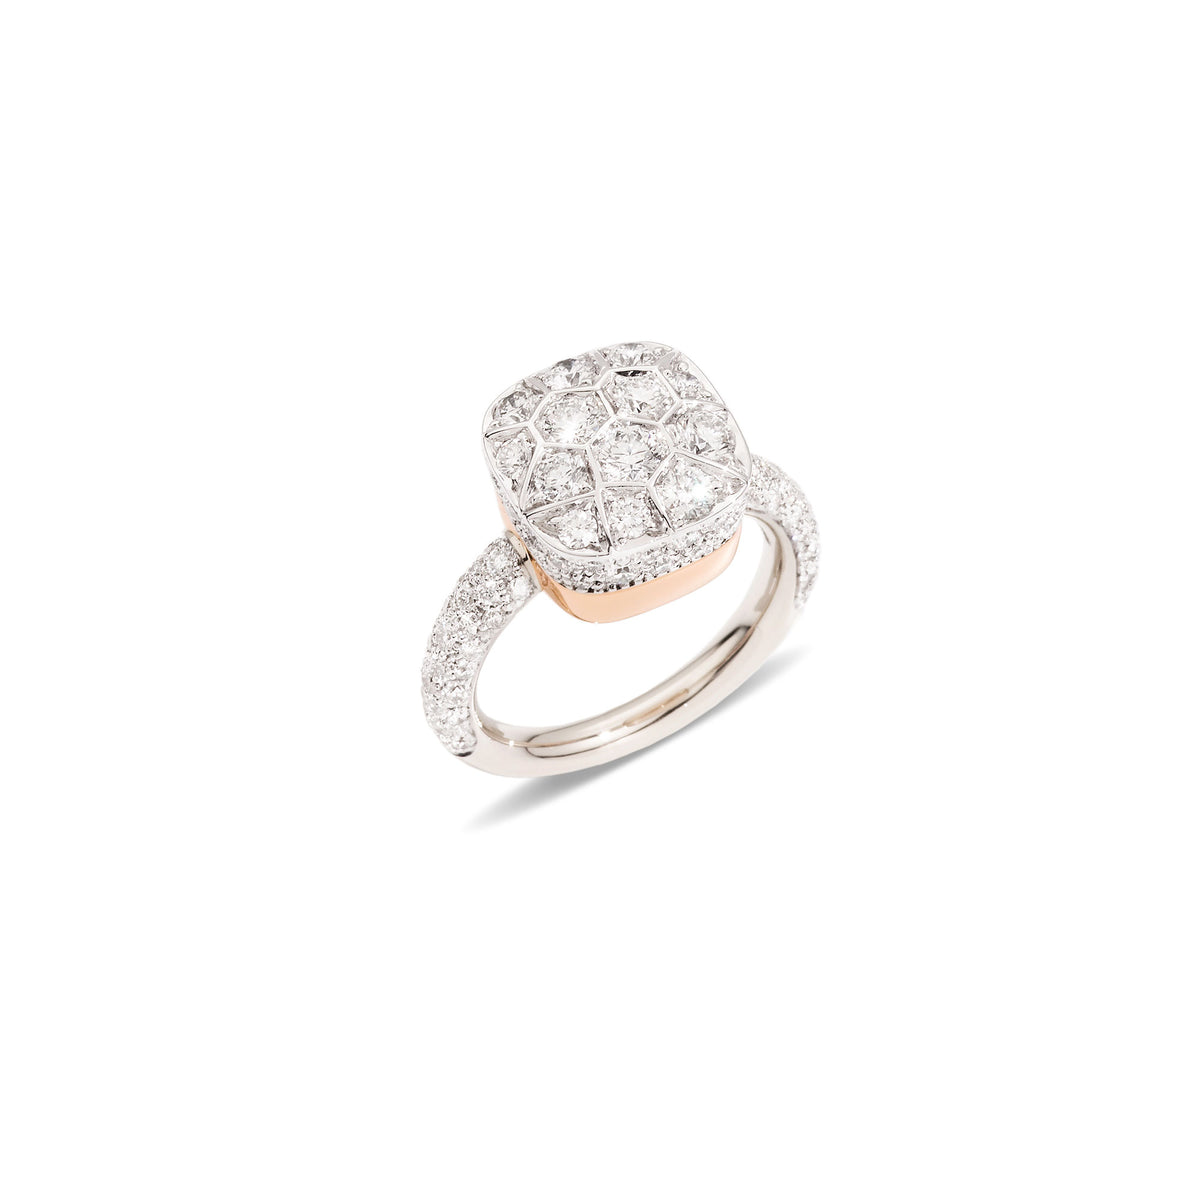 Nudo Maxi Diamond Ring in 18k White Gold and Rose Gold with Diamonds - Orsini Jewellers NZ